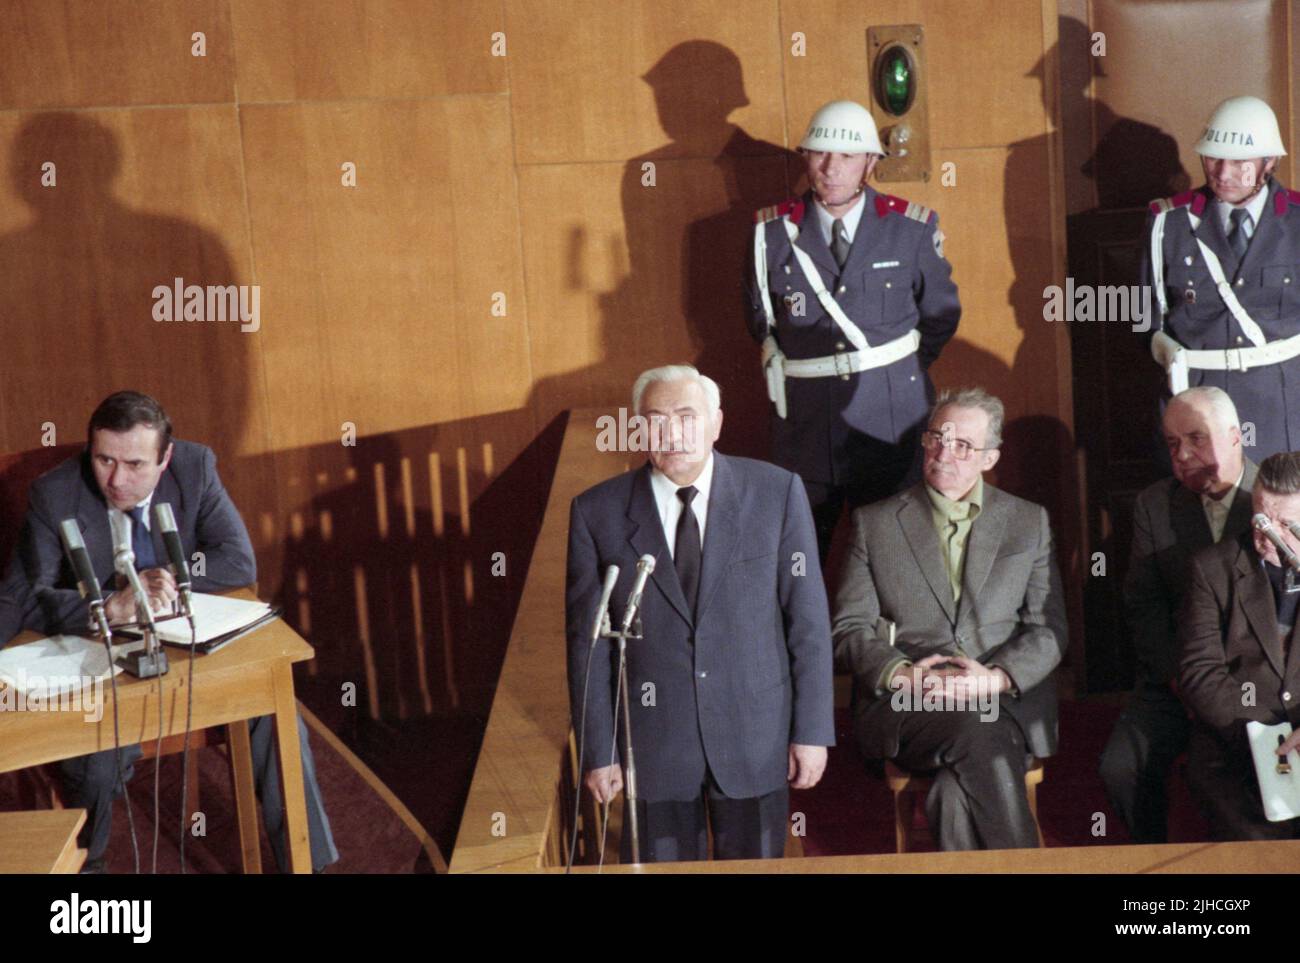 Bucharest, Romania, January 1990. The trial of the four high-ranking officials in Nicolae Ceausescu's regime who contributed to the many deaths in the Romanian revolution of December 1989. The four were accused of genocide and sentenced to life in prison, but eventually served only a few years. Stock Photo